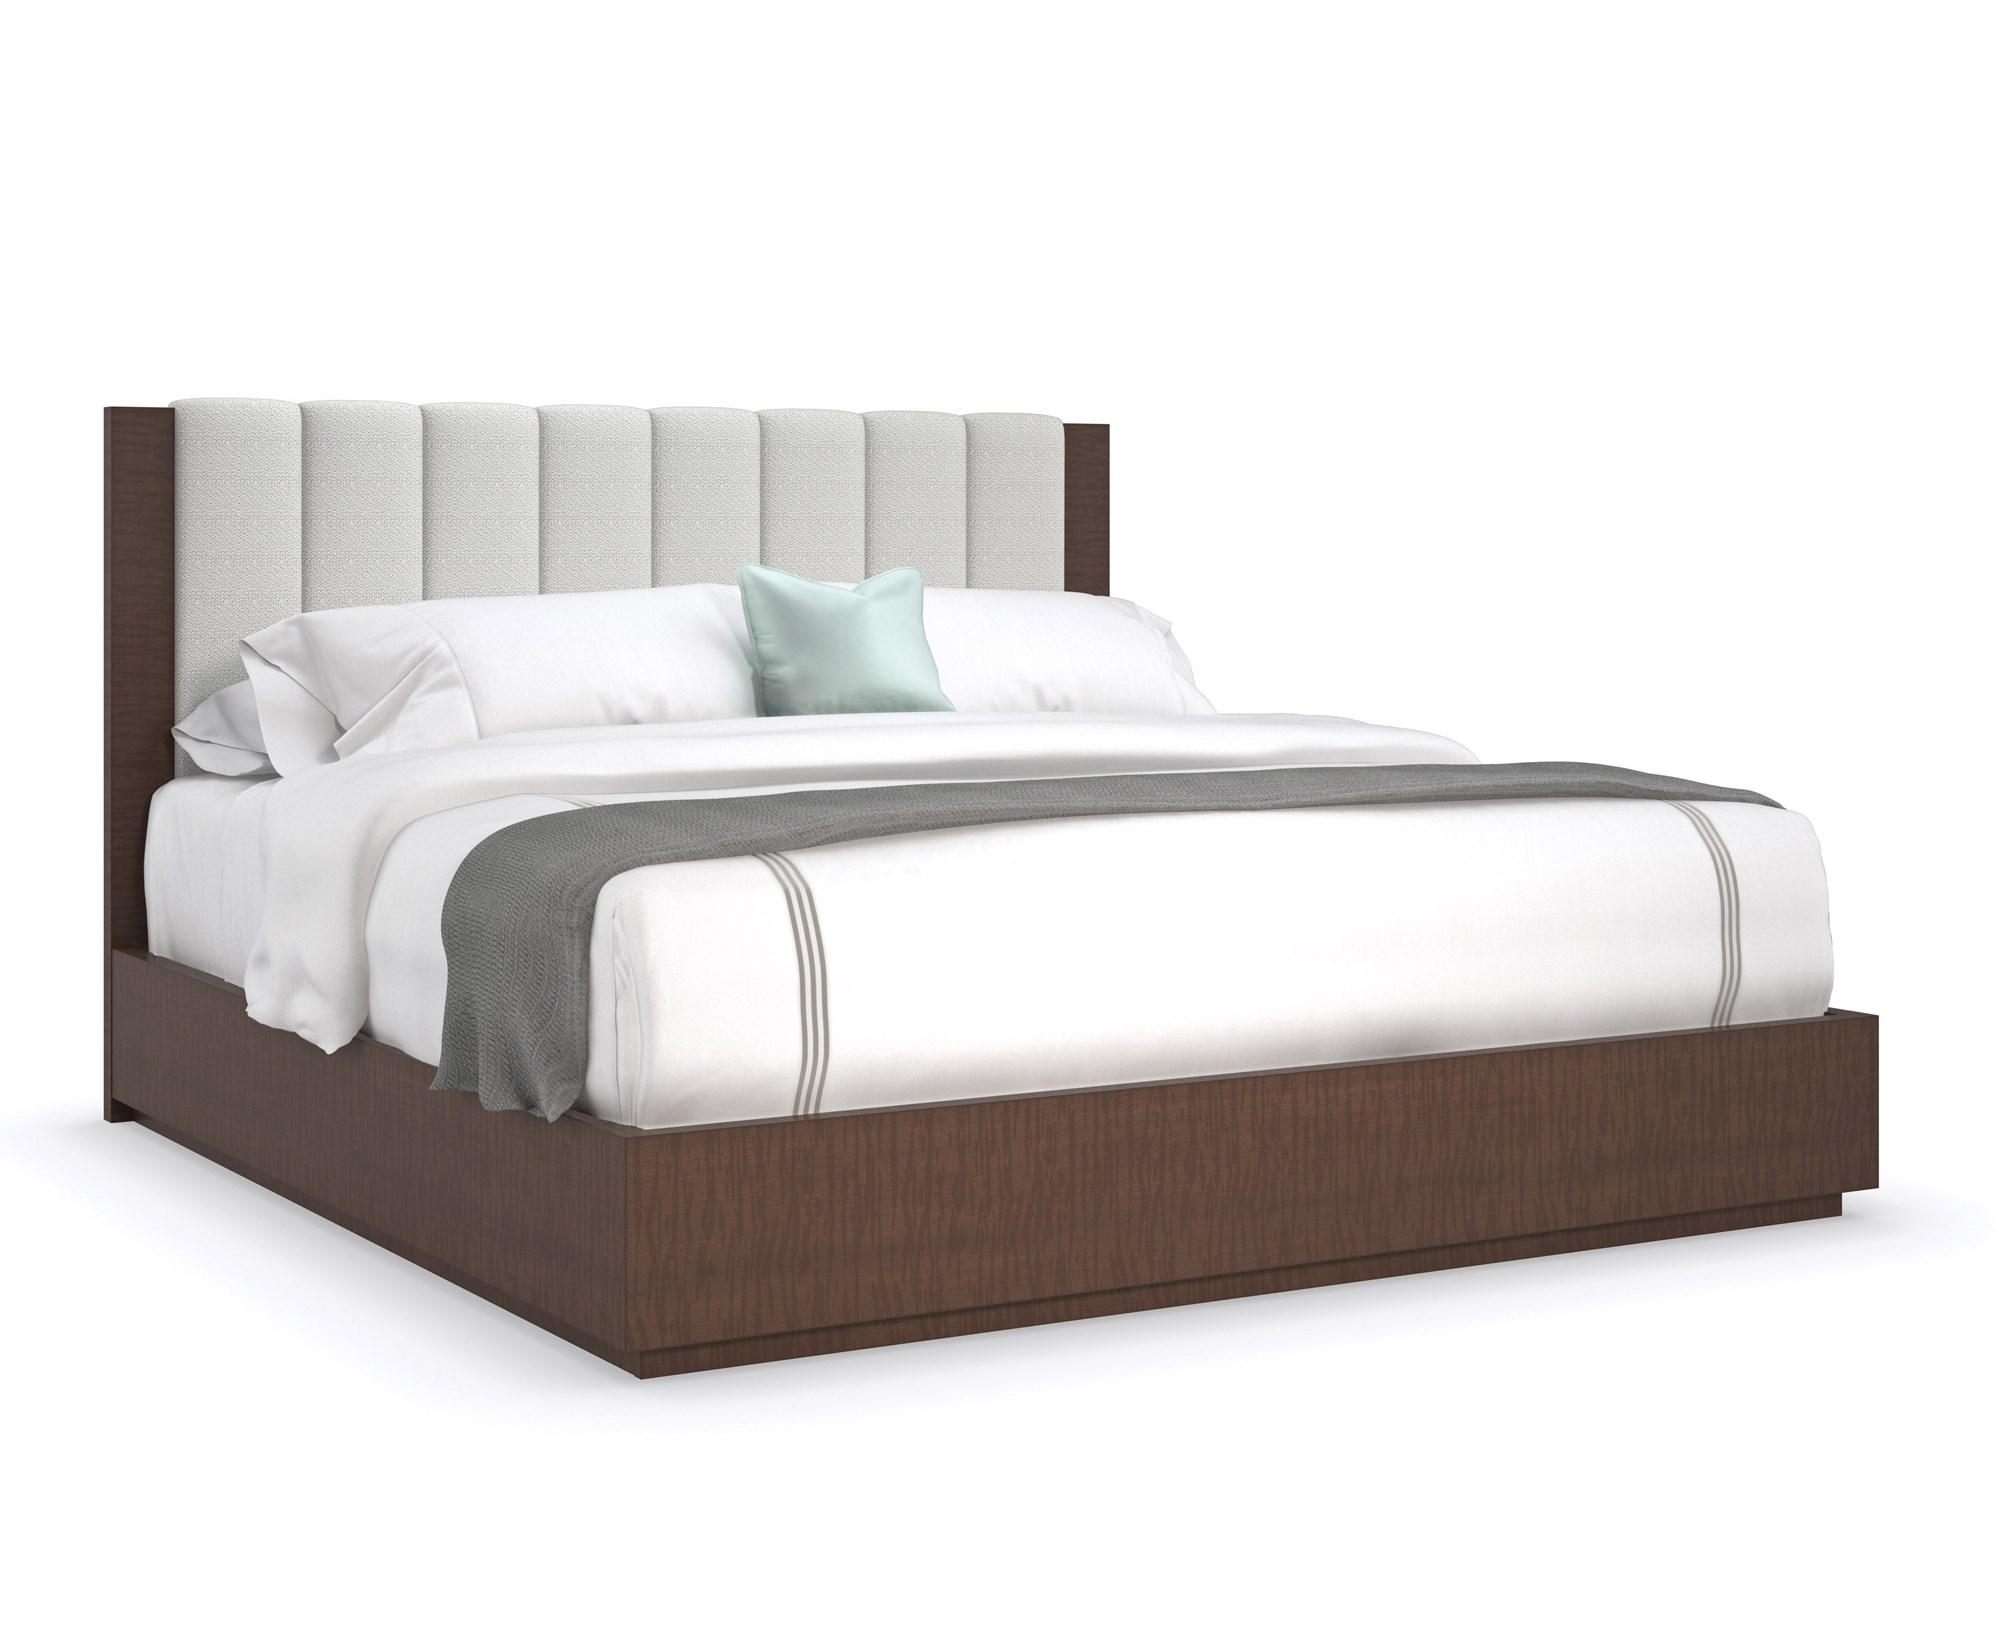 Contemporary Platform Bed INNER PASSION CLA-421-101 in Light Gray, Brown Fabric